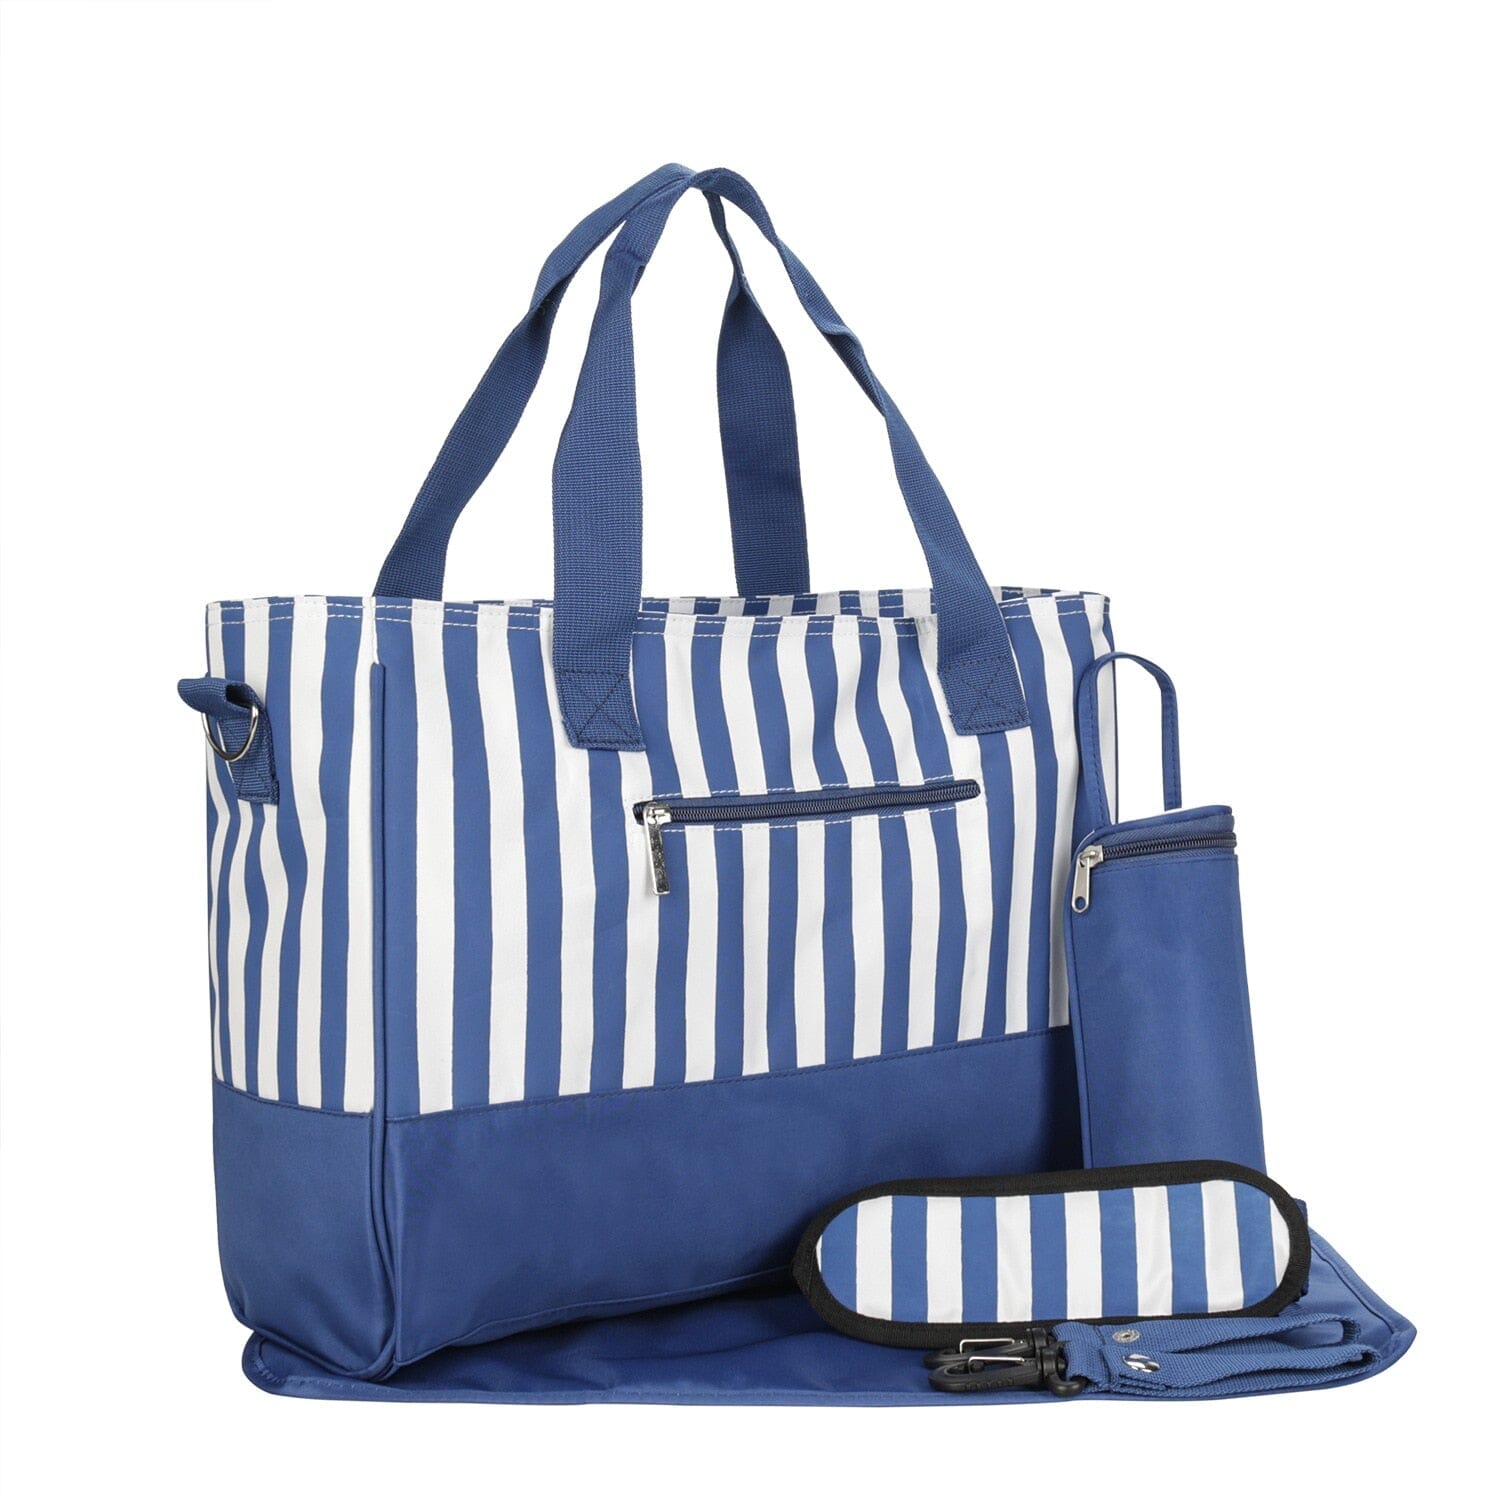 Navy Blue And White Striped Diaper Bag The Store Bags blue 